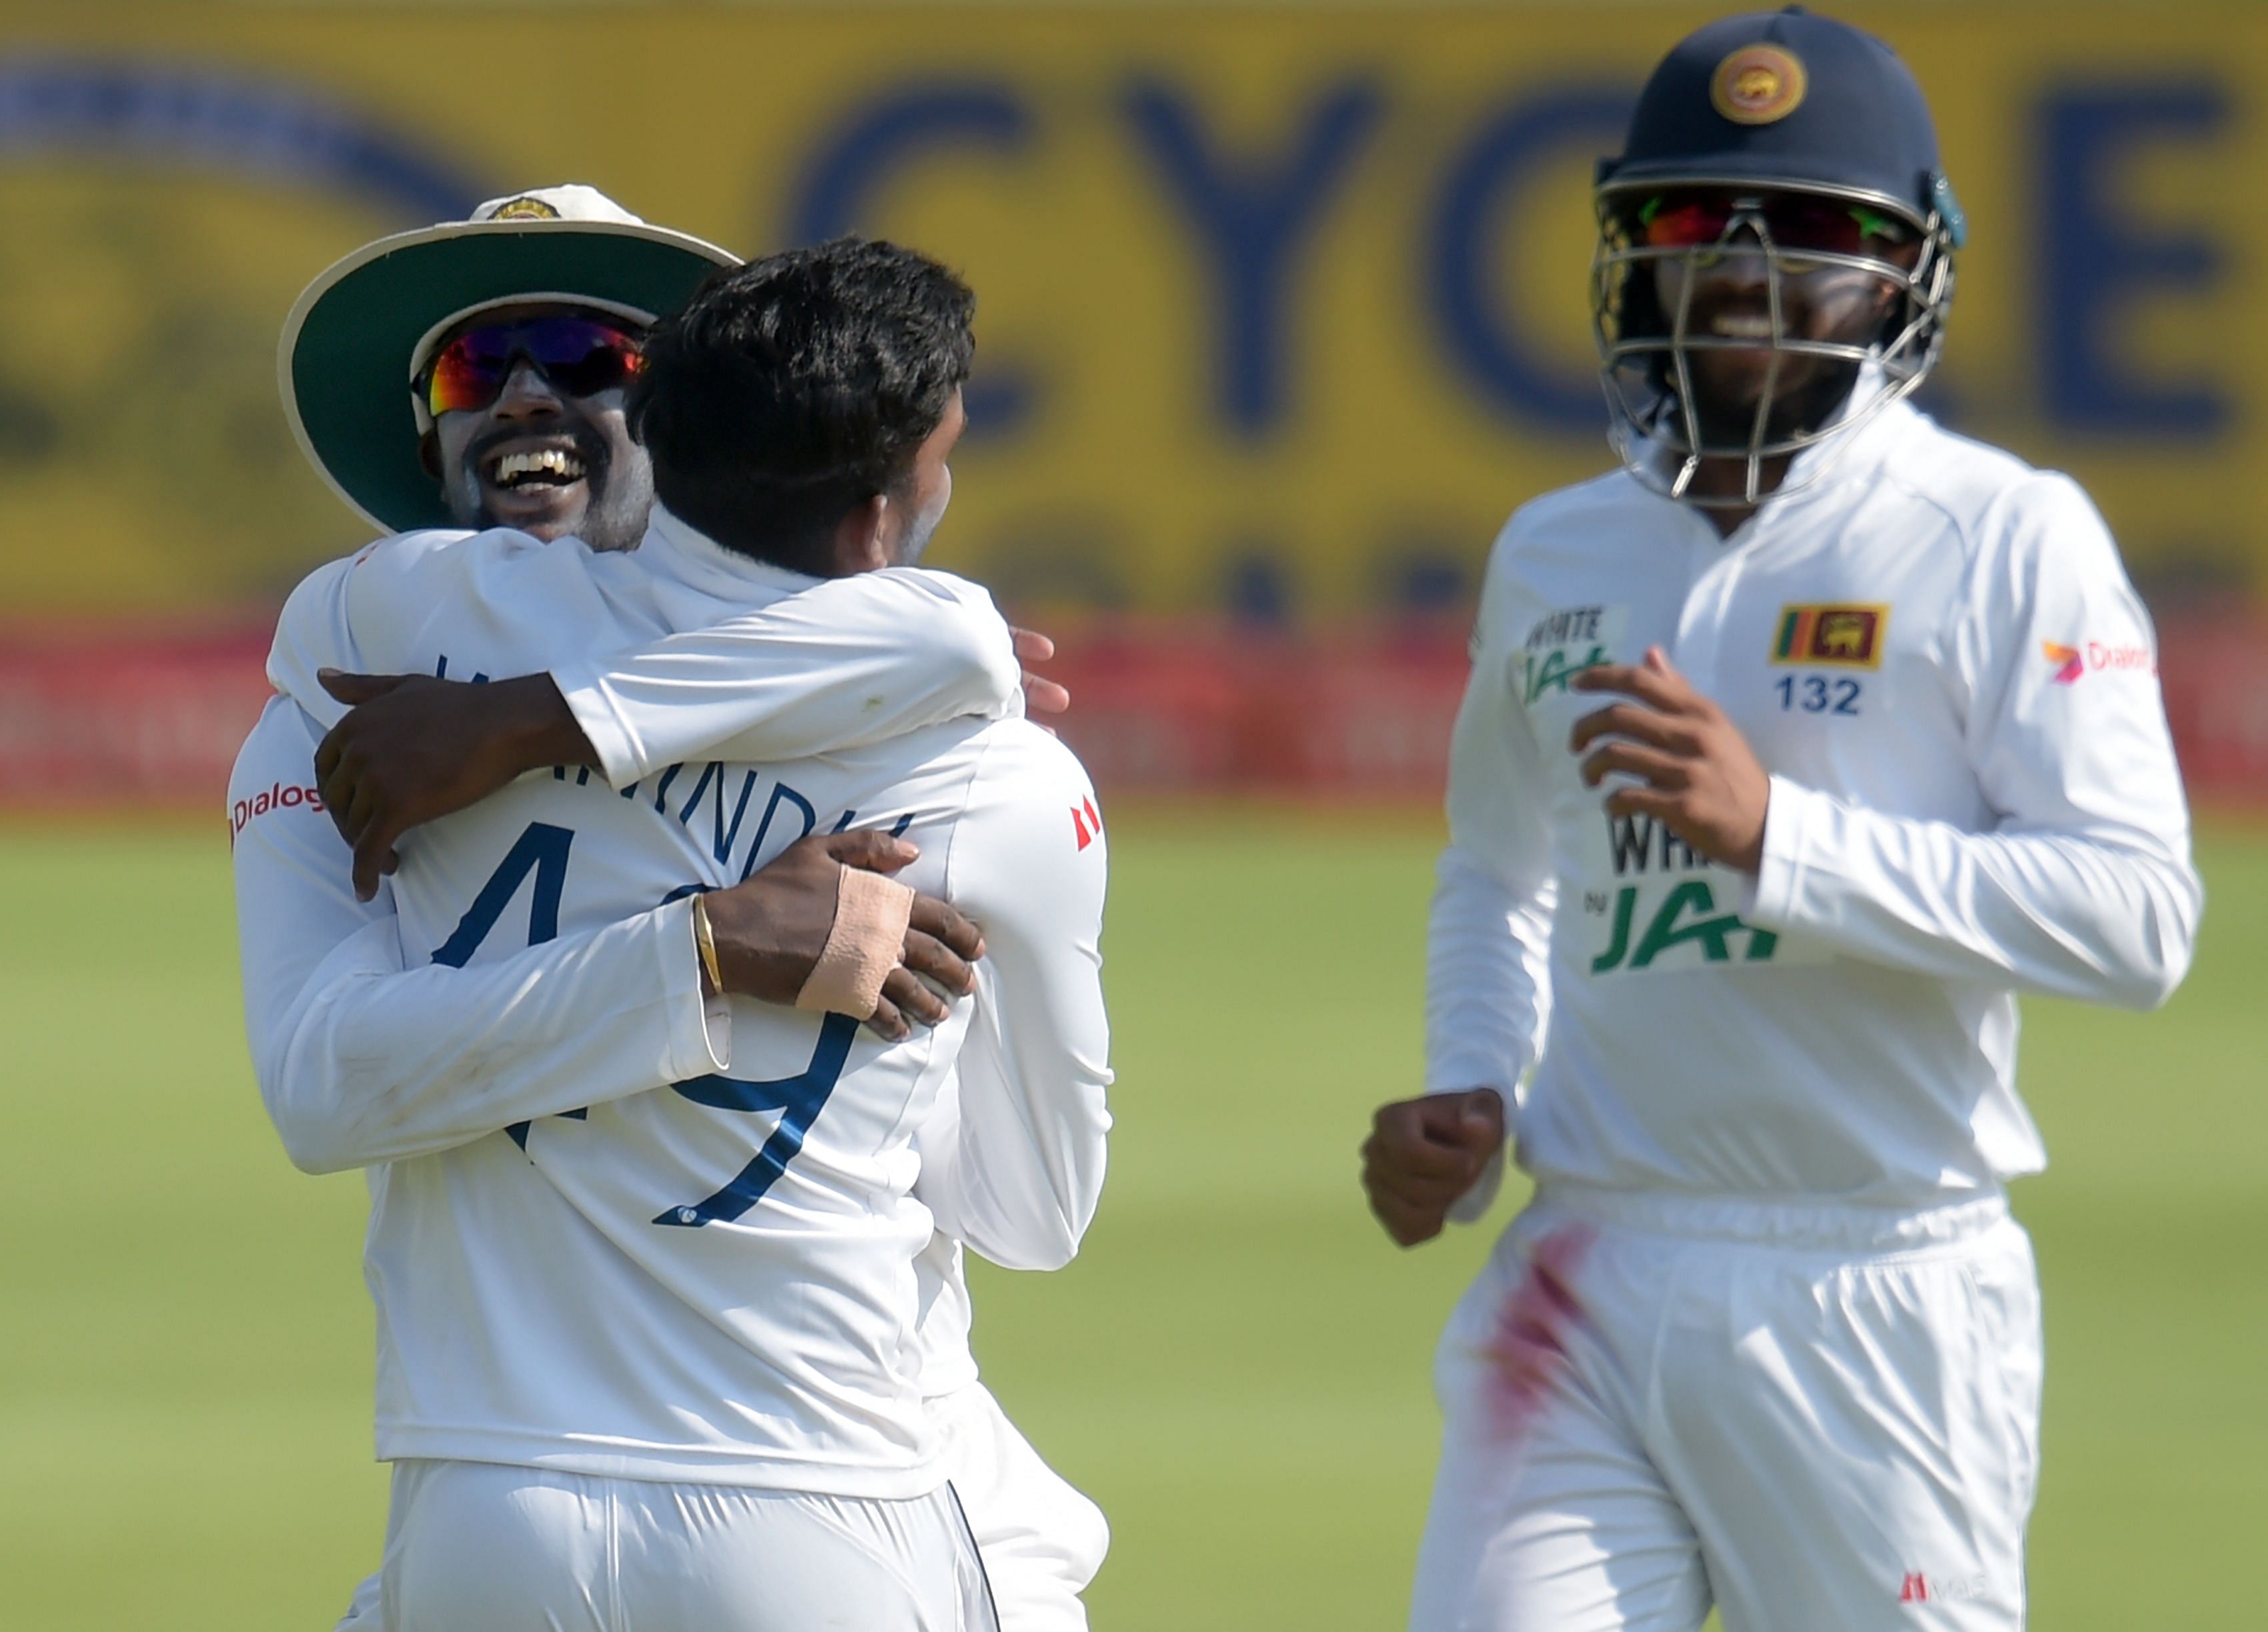   Sri Lanka's Wanindu Hasaranga (C) celebrates with teammates after the dismissal of unseen South Africa's captain Quinton de Kock during the second day of the first Test cricket match between South Africa and Sri Lanka at SuperSport Park in Centurion on December 27, 2020. Credit: AFP Photo